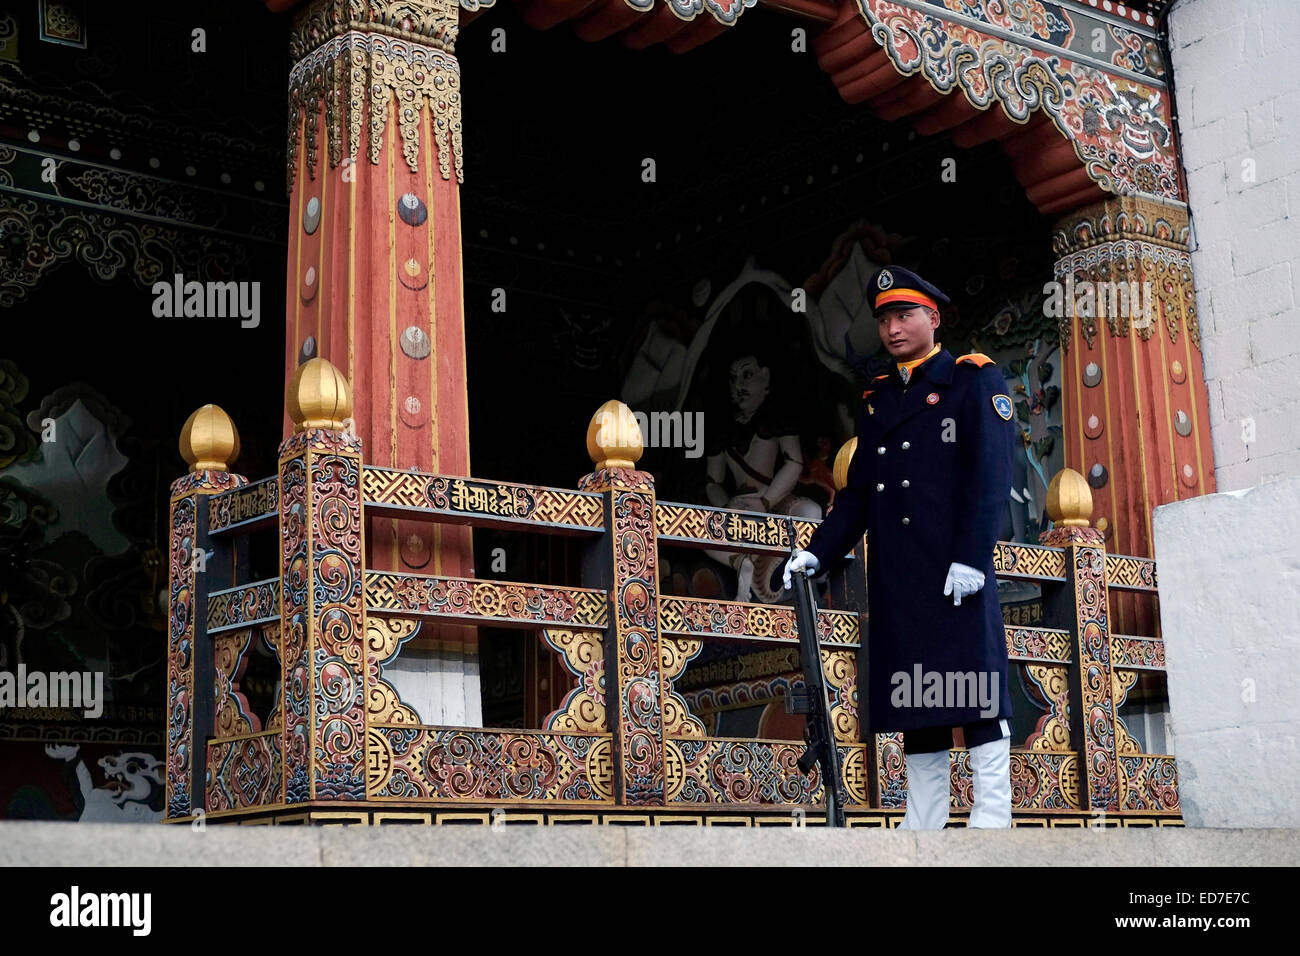 An armed sentry stands firm at the entrance to the government offices in Tashichho Dzong fortress seat of Bhutan's government since 1952 and presently houses the throne room and offices of the king on the edge of the city of Thimphu the capital of Bhutan Stock Photo